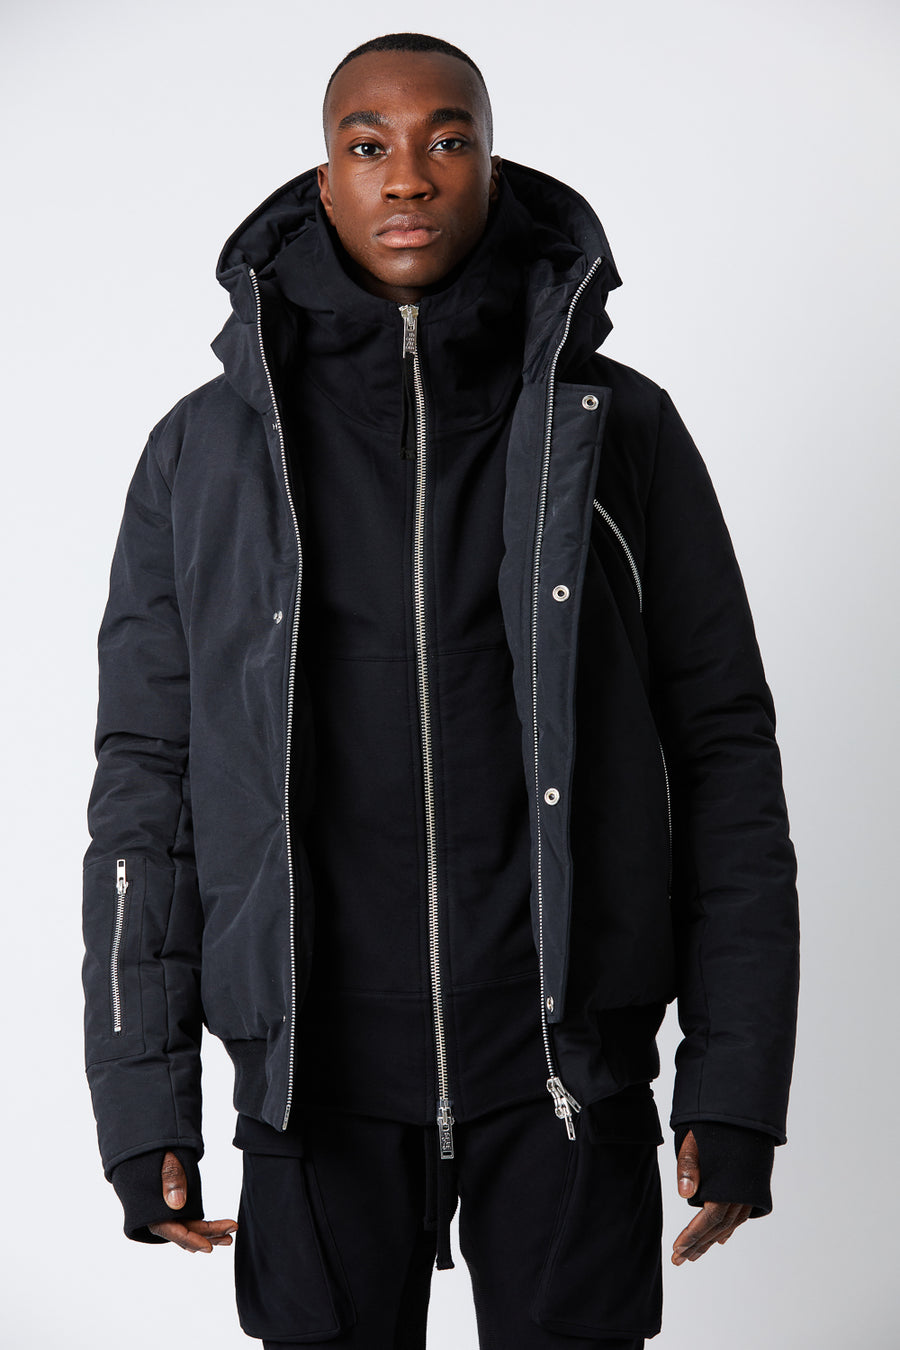 Buy the Thom Krom M J 59 Jacket in Black at Intro. Spend £50 for free UK delivery. Official stockists. We ship worldwide.